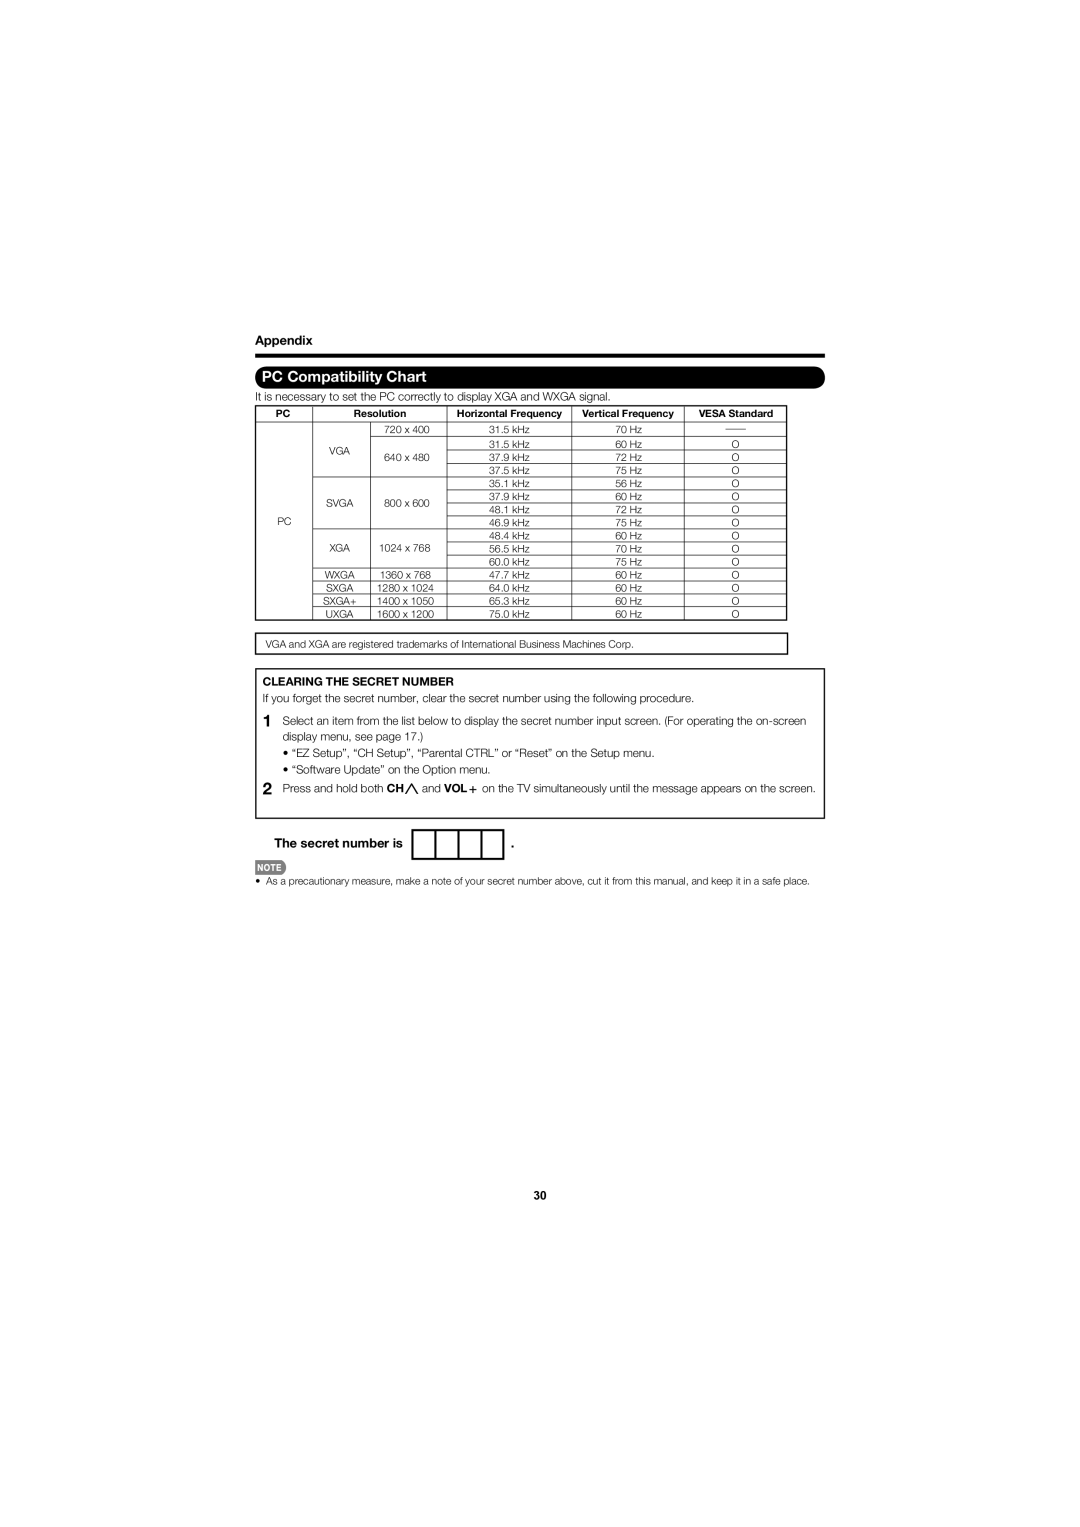 Sharp LC-40D78UN operation manual PC Compatibility Chart, Clearing The Secret Number, The secret number is, Appendix 